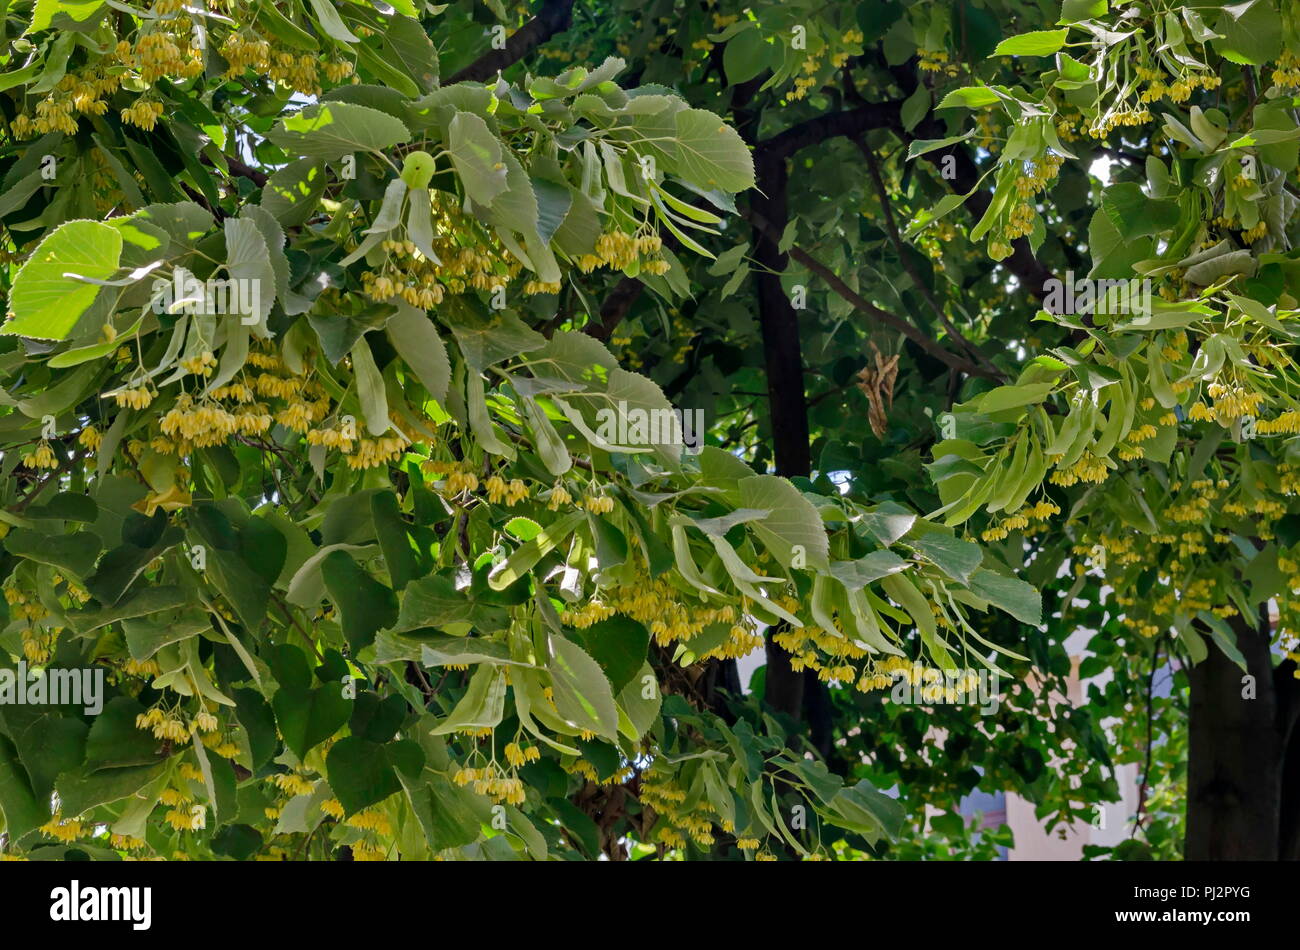 Yellow flowers and  green leaves of Tilia, linden or lime tree in autumn, Sofia, Bulgaria Stock Photo